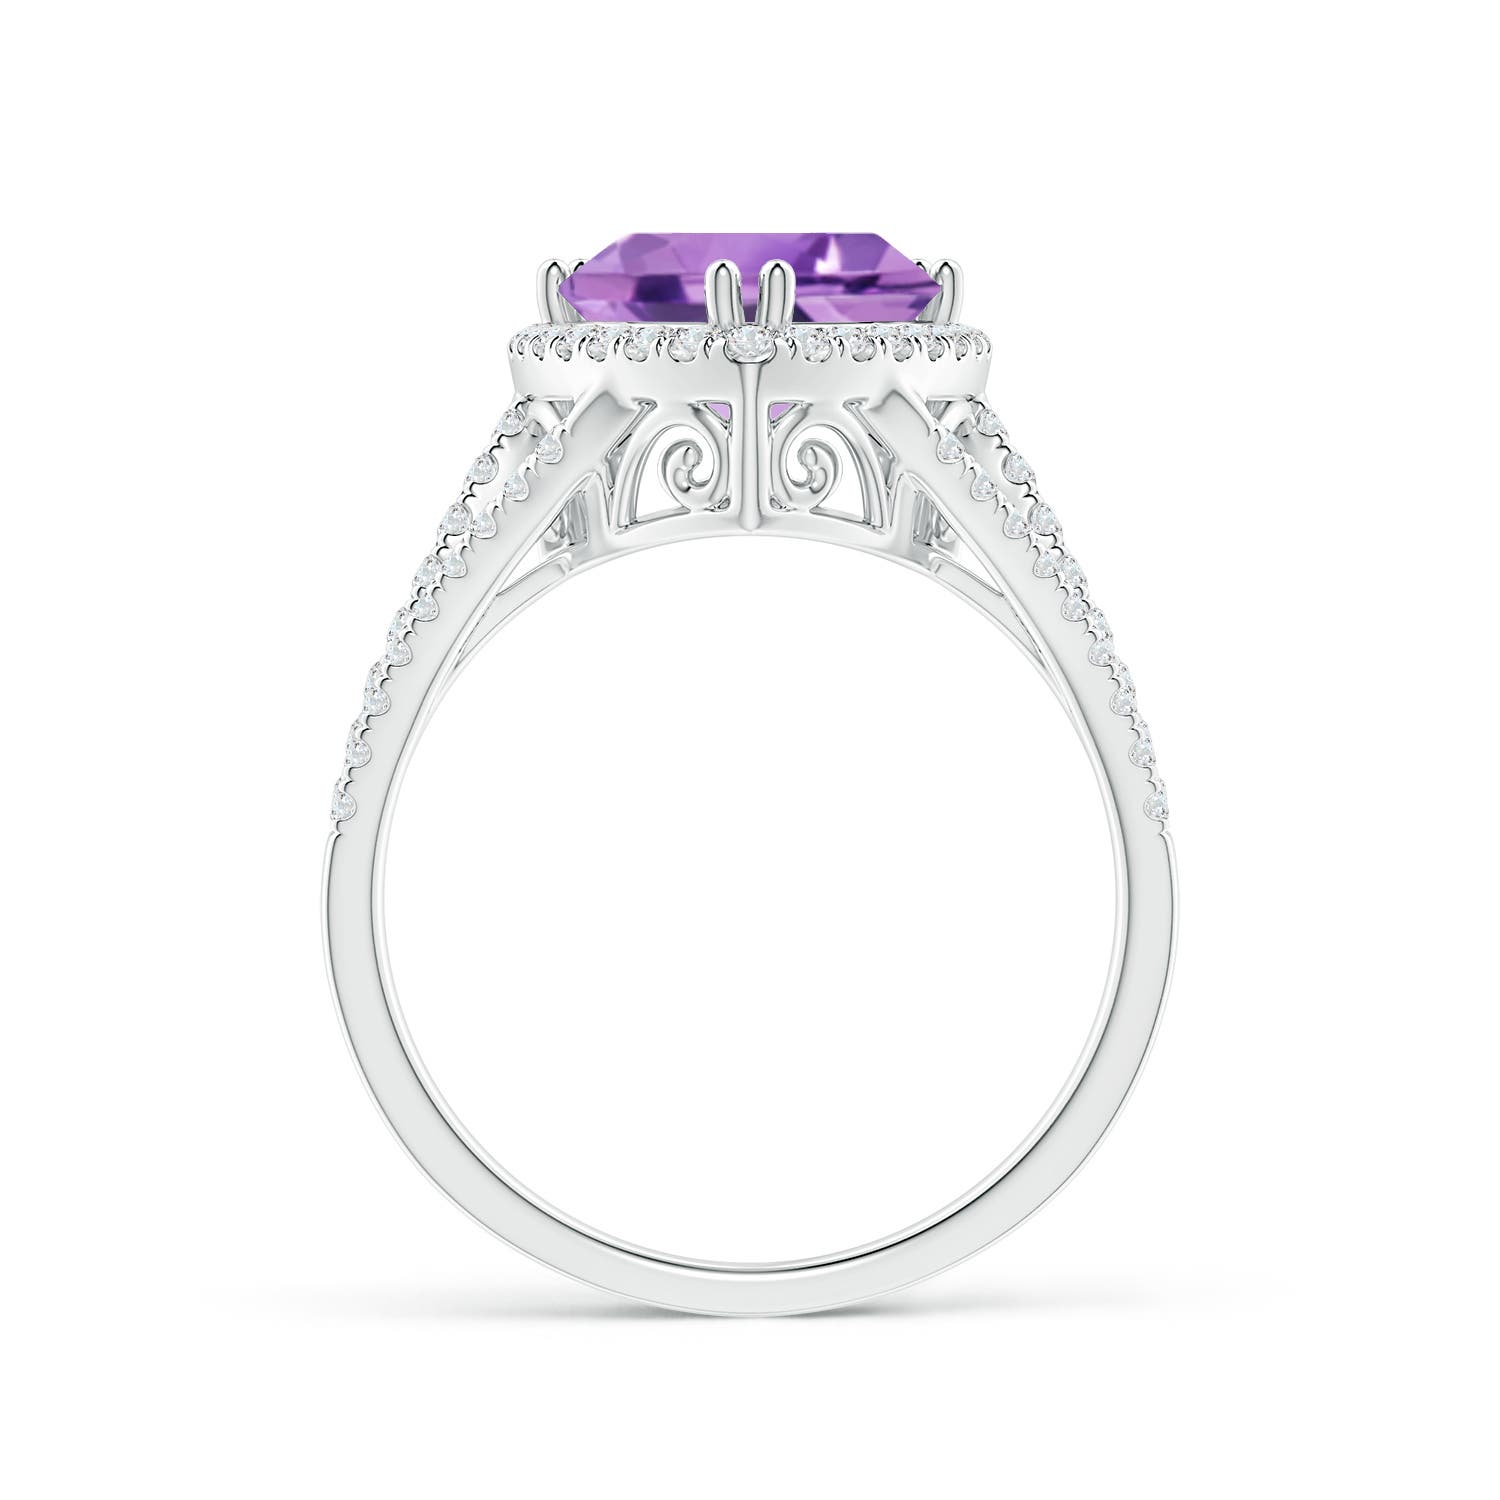 A - Amethyst / 2.64 CT / 14 KT White Gold